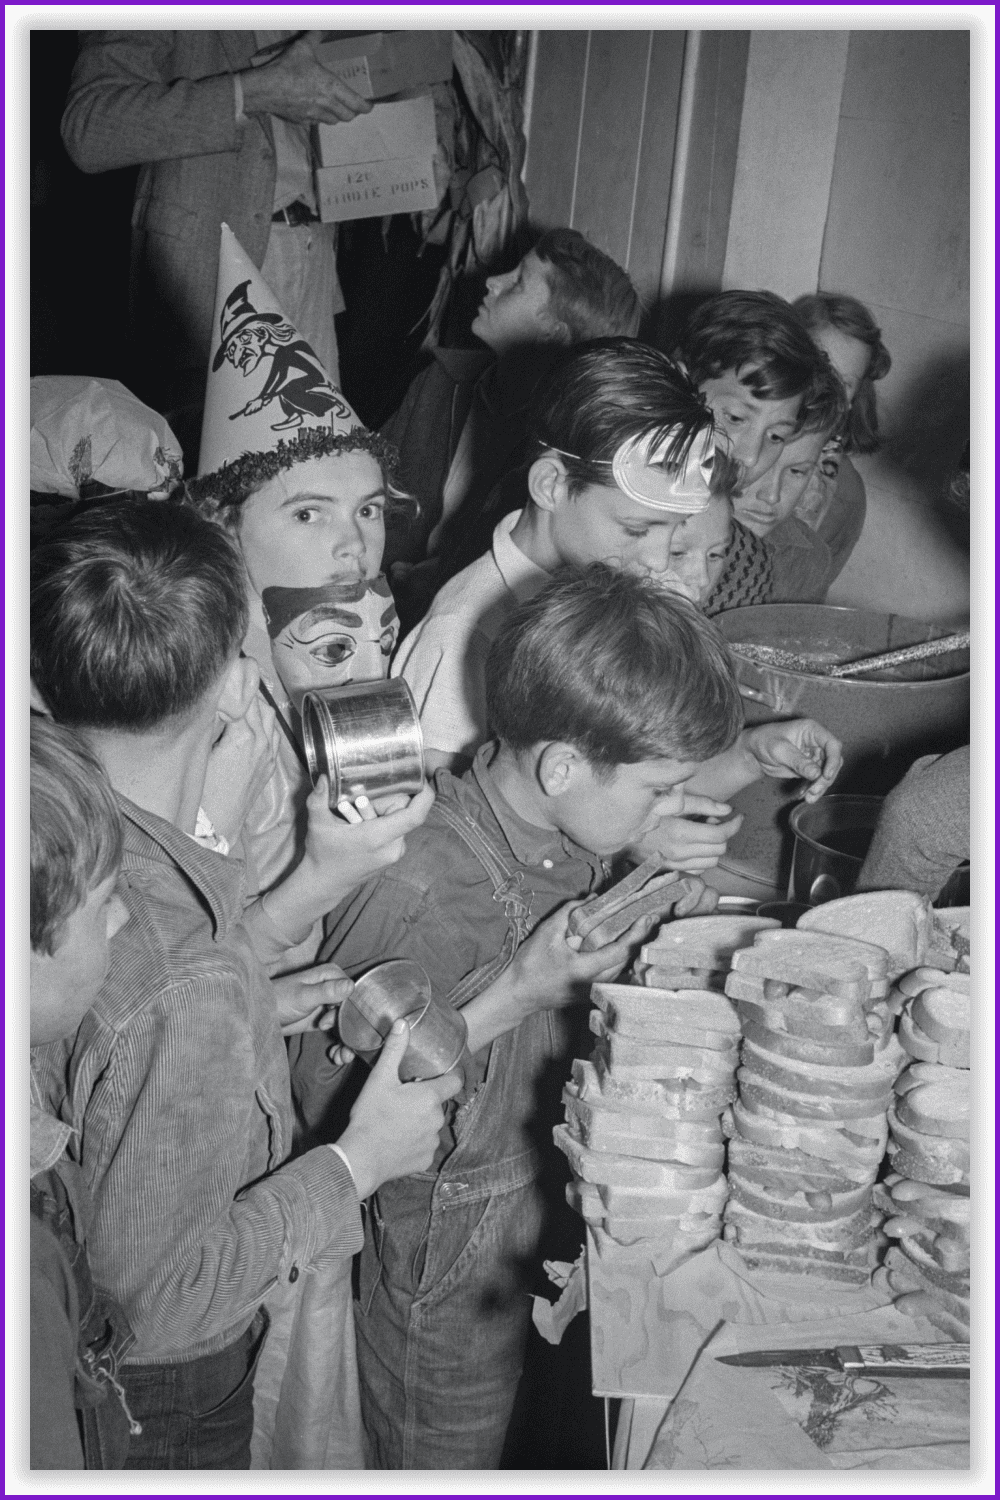 The children crowd and push to reach the refreshments at the halloween party in the shafter migrant camp.